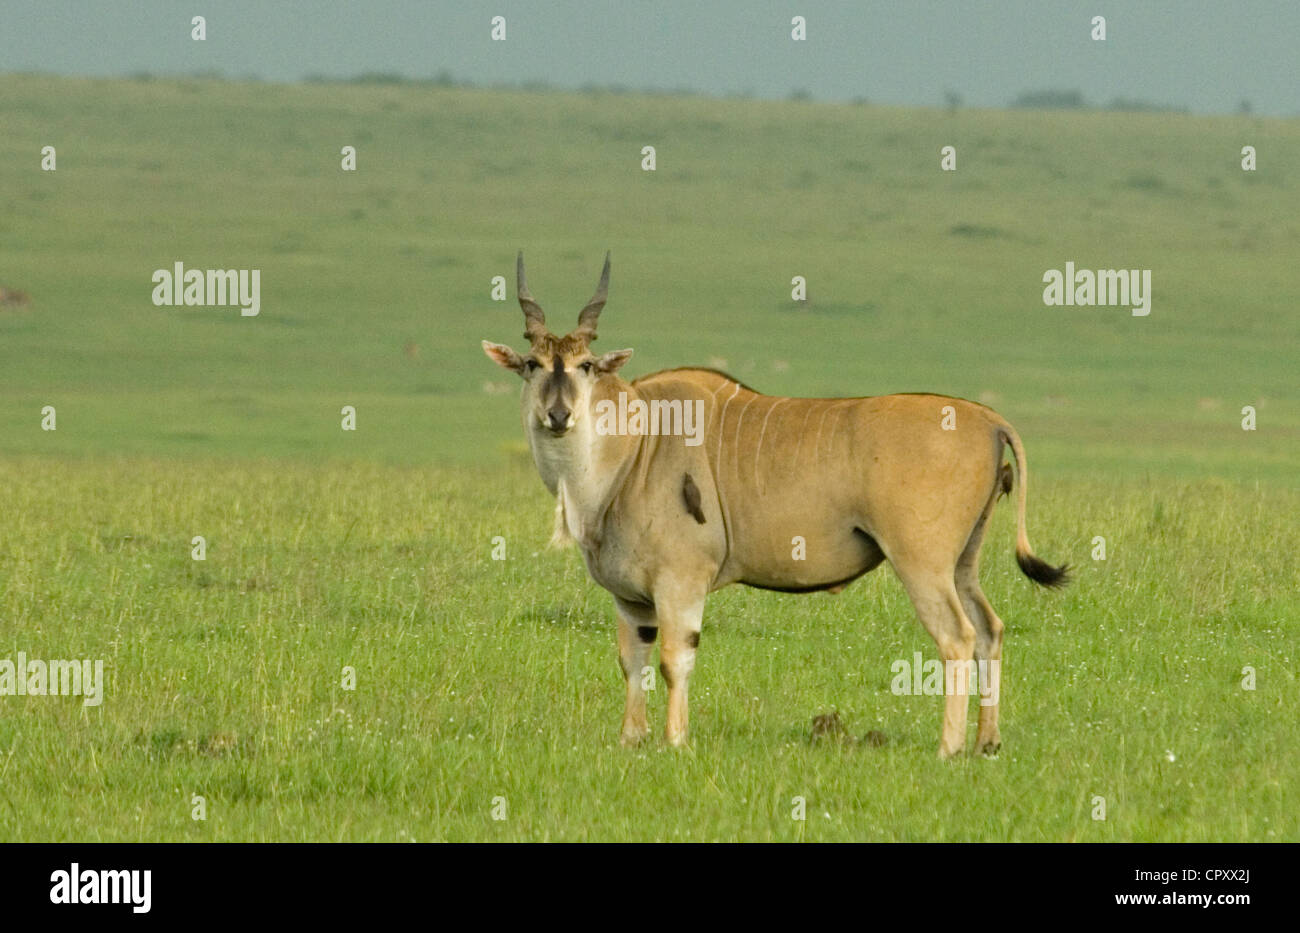 Eland standing in plains Stock Photo